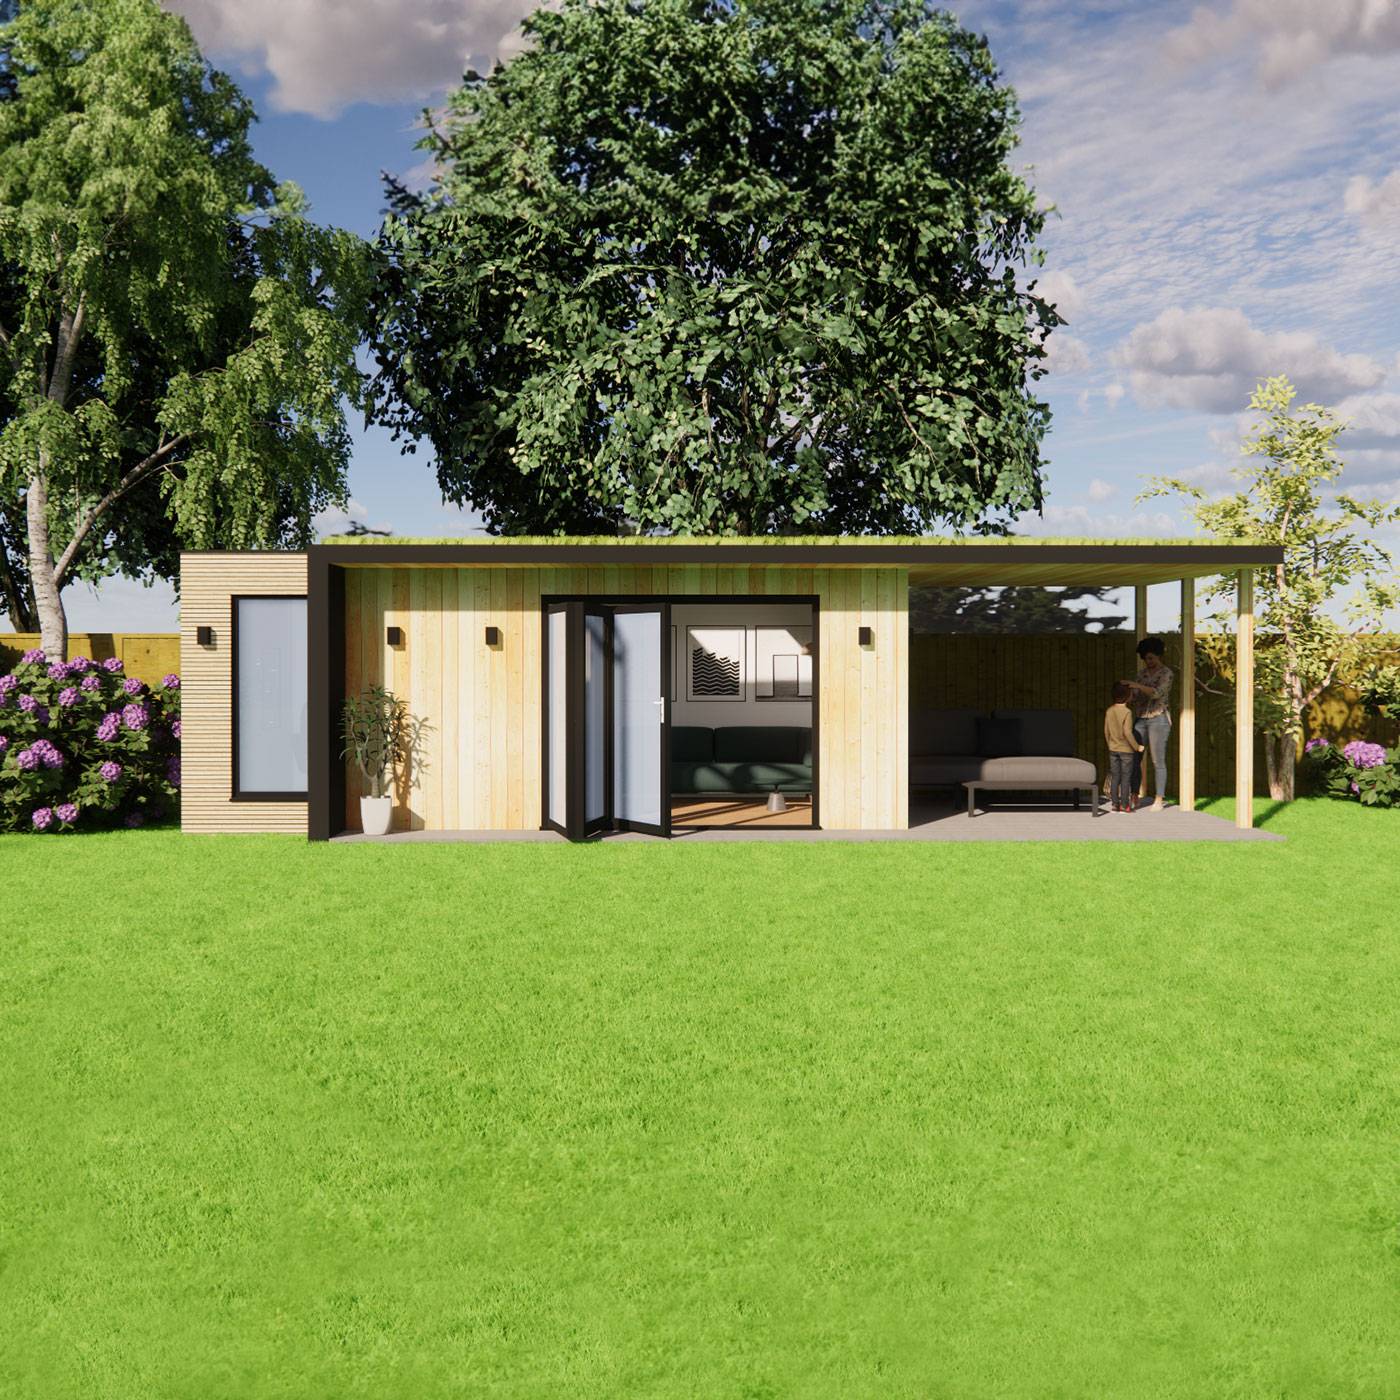 3D design of garden room with roof overhang 3.0m by 6.2m